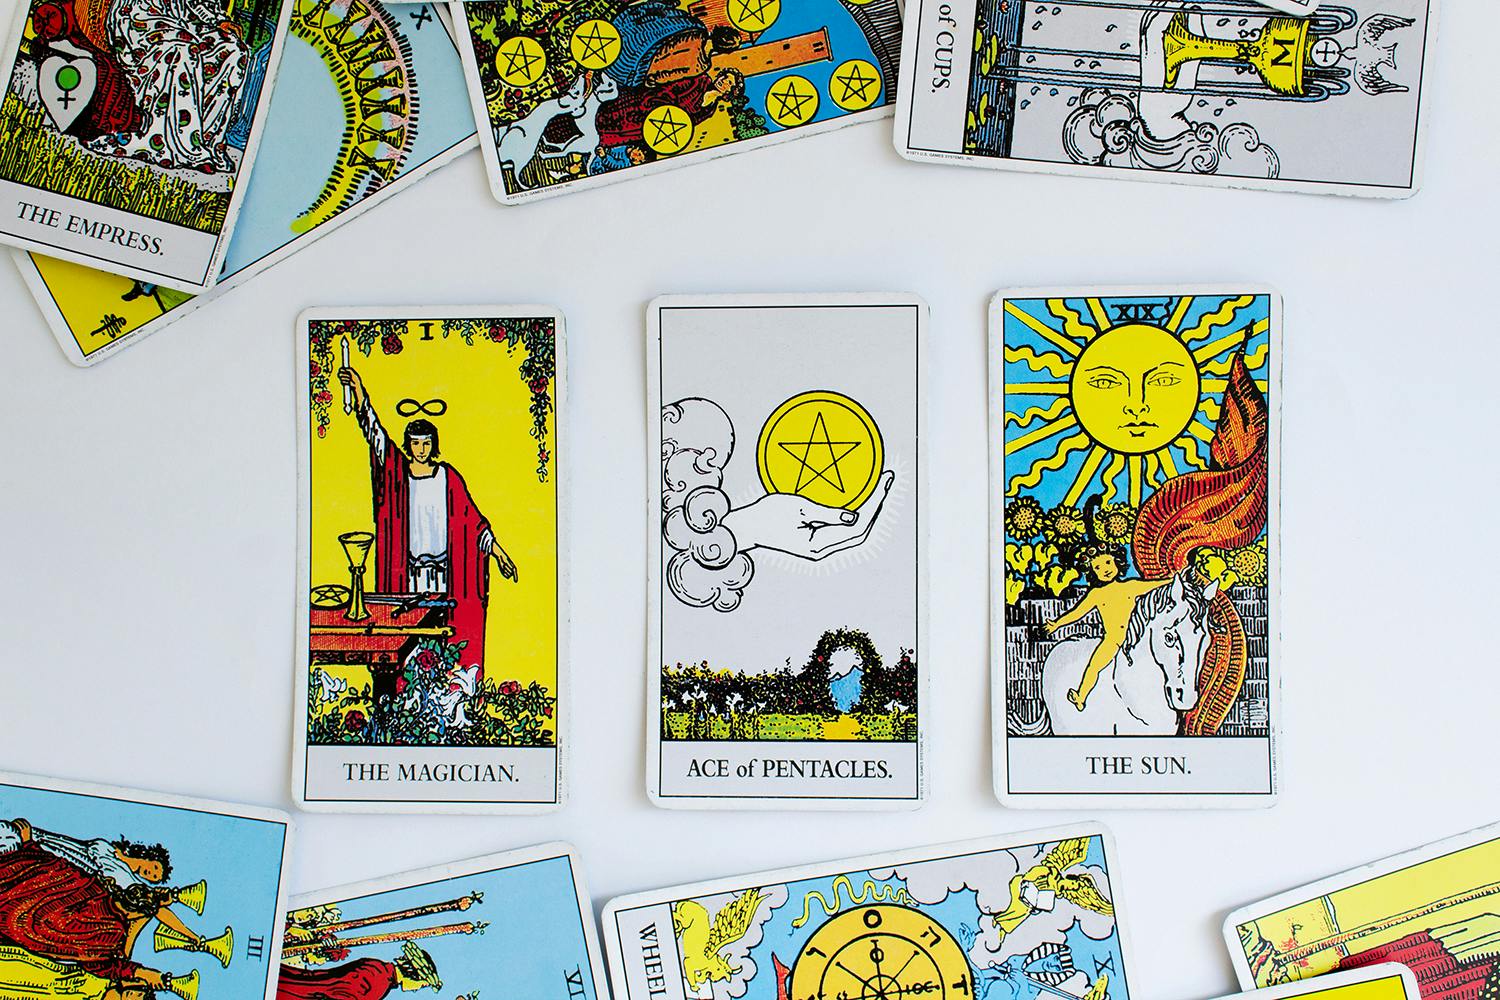 Photo of the Rider-Waite tarot deck spread out, with the magician, ace of pentacles, and the sun facing out.